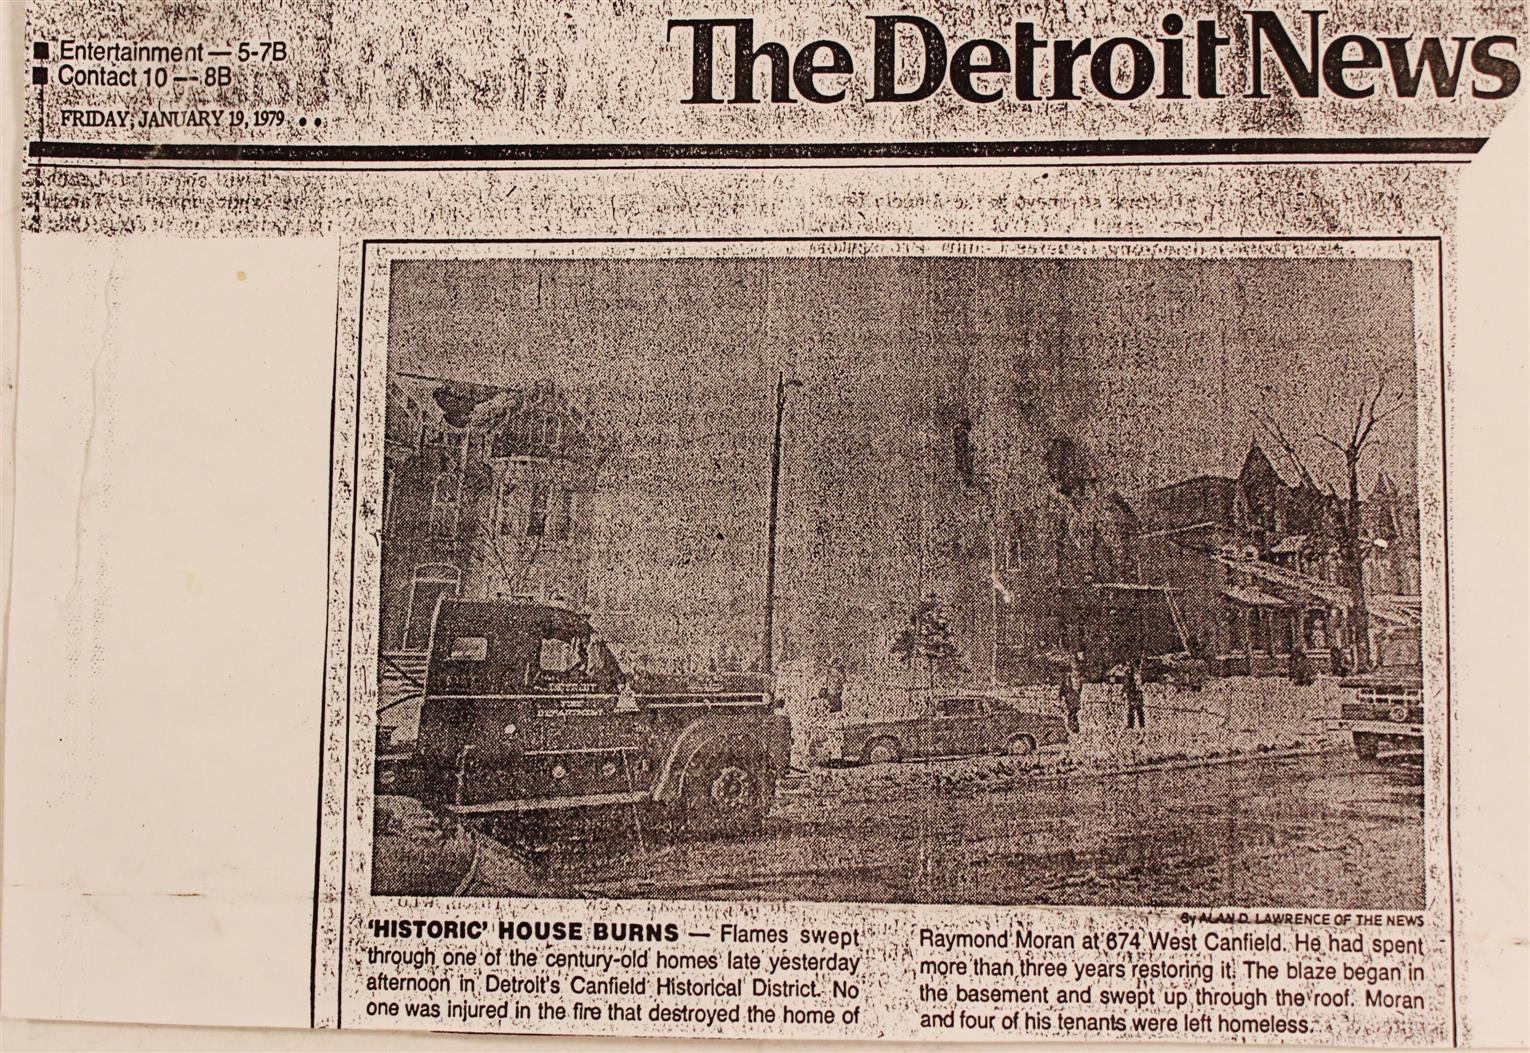 Detroit News Article about 674 burning